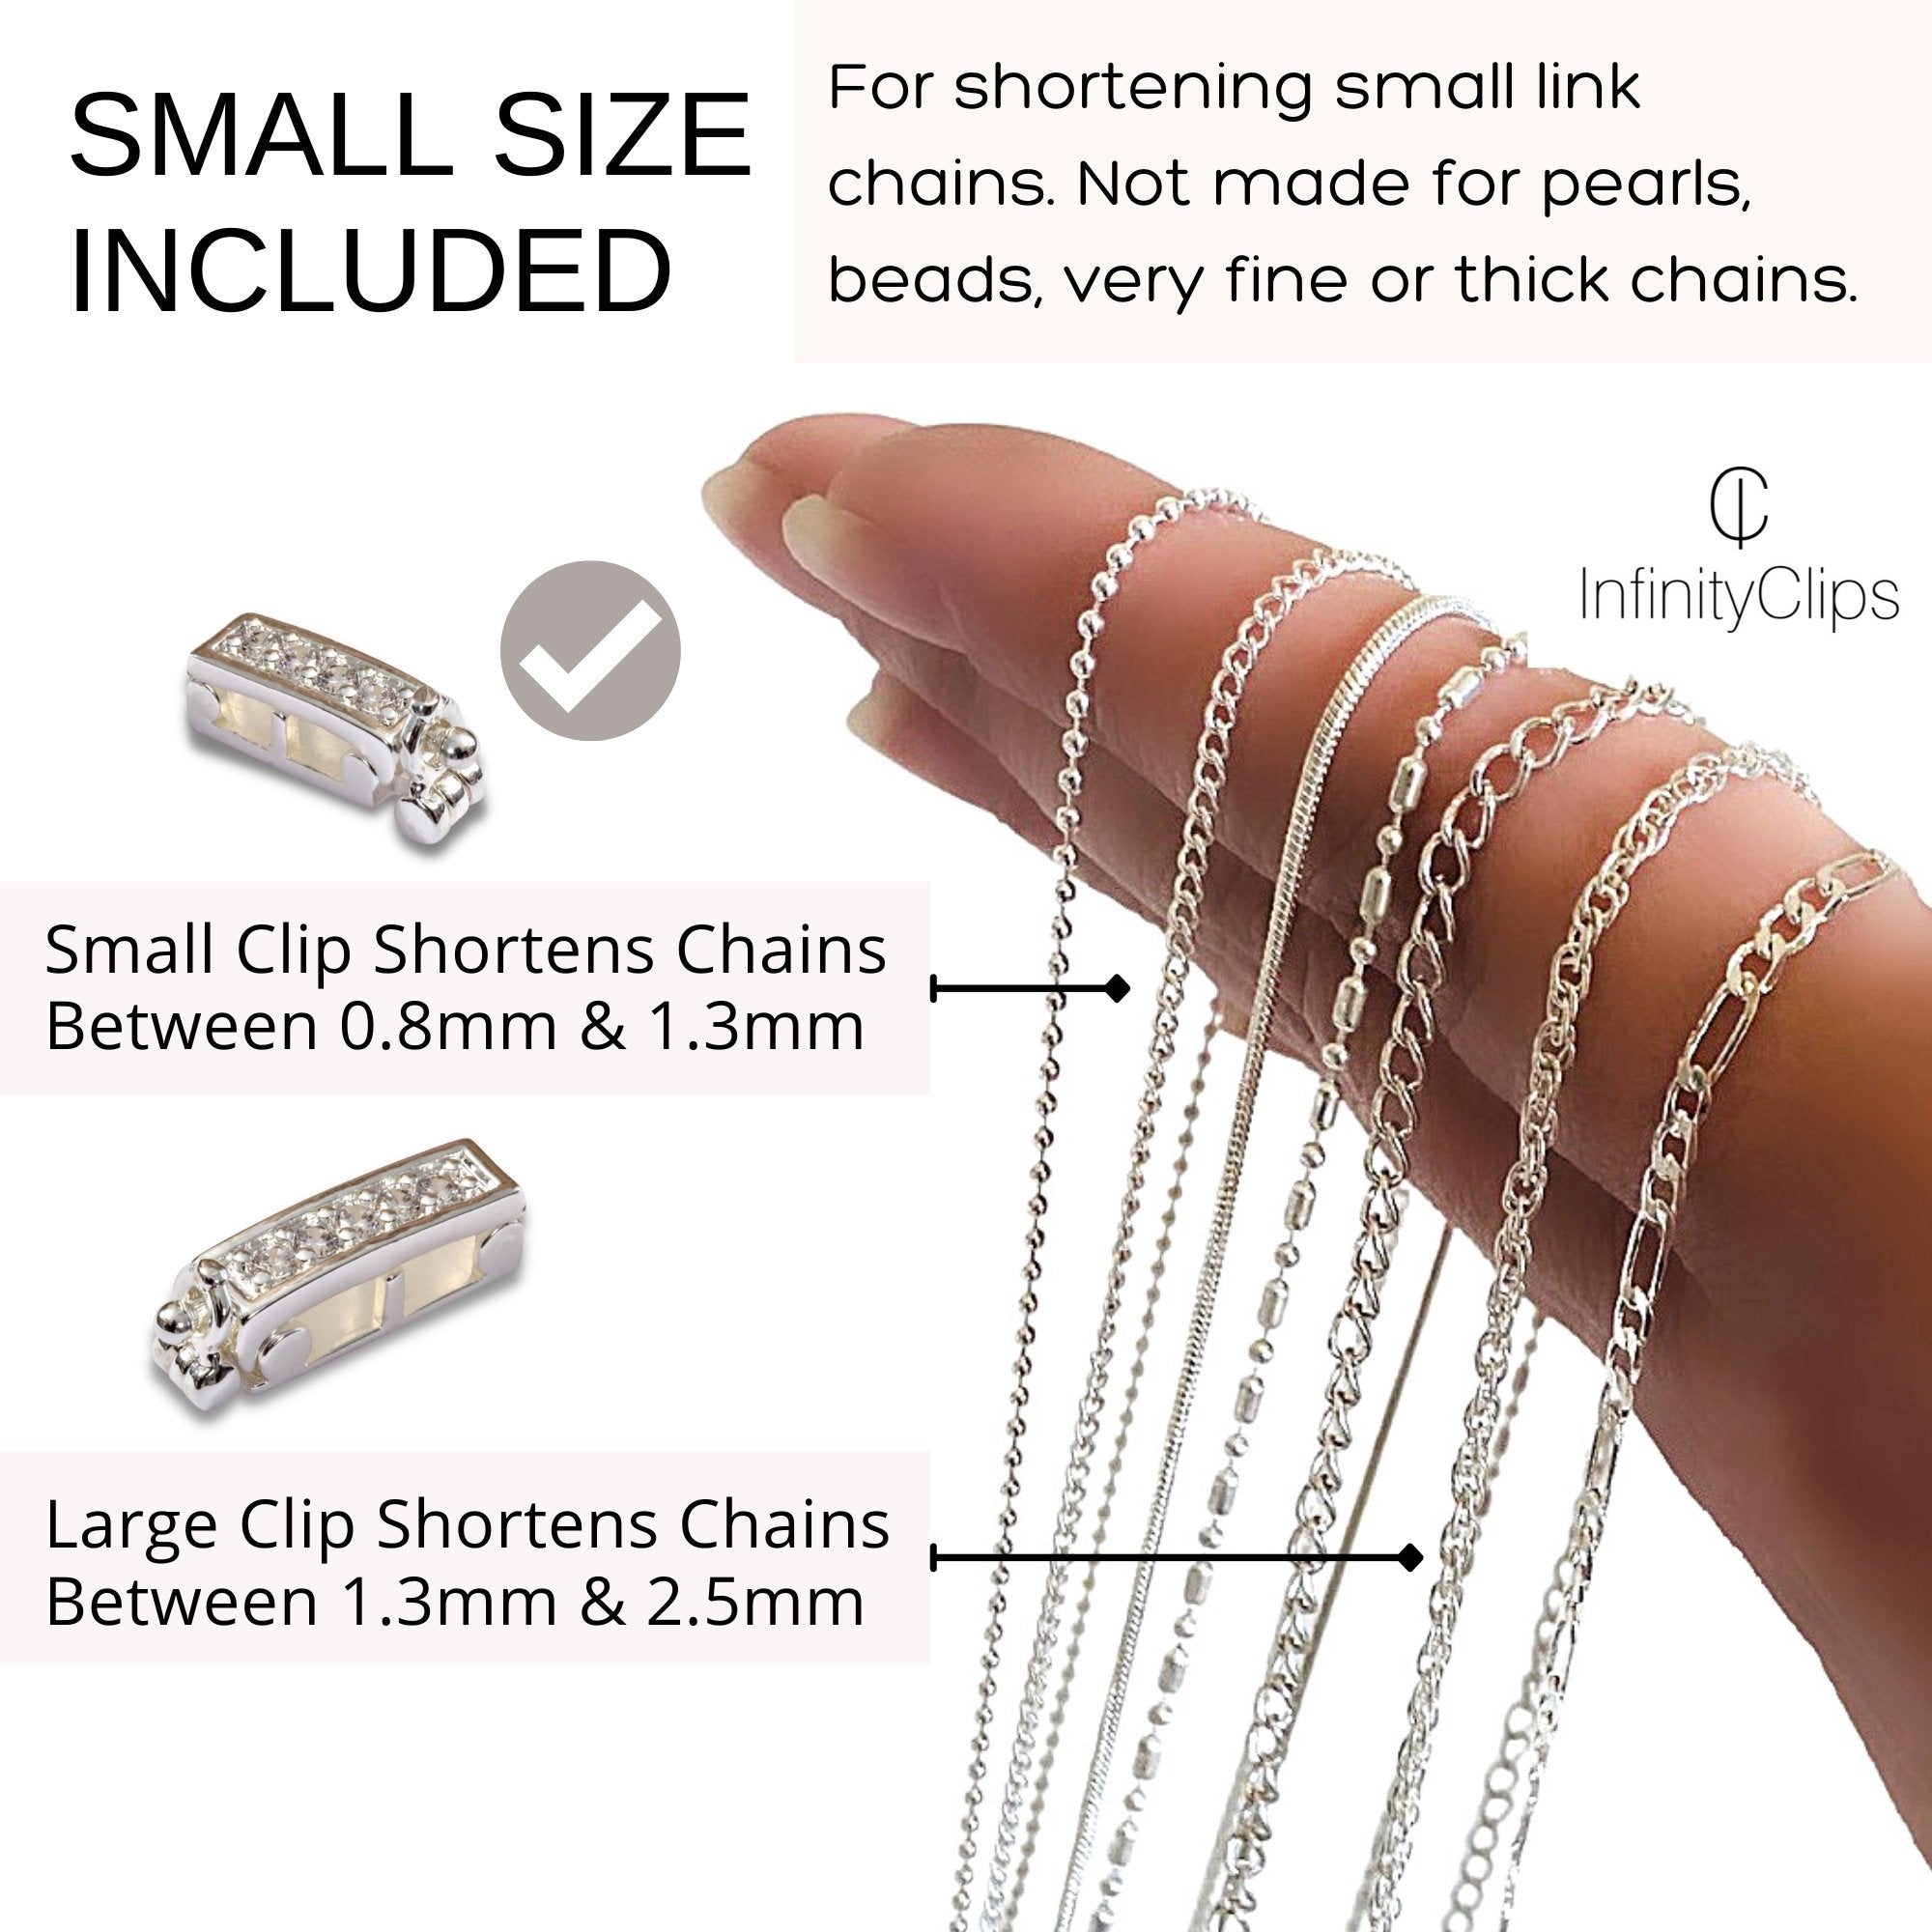 Infinity Clips Necklace Shortener, Chain Shortener, Clasp for Necklace,  Shortener Clasp, Crystal Butterfly Necklace Accent, Style 1 White 